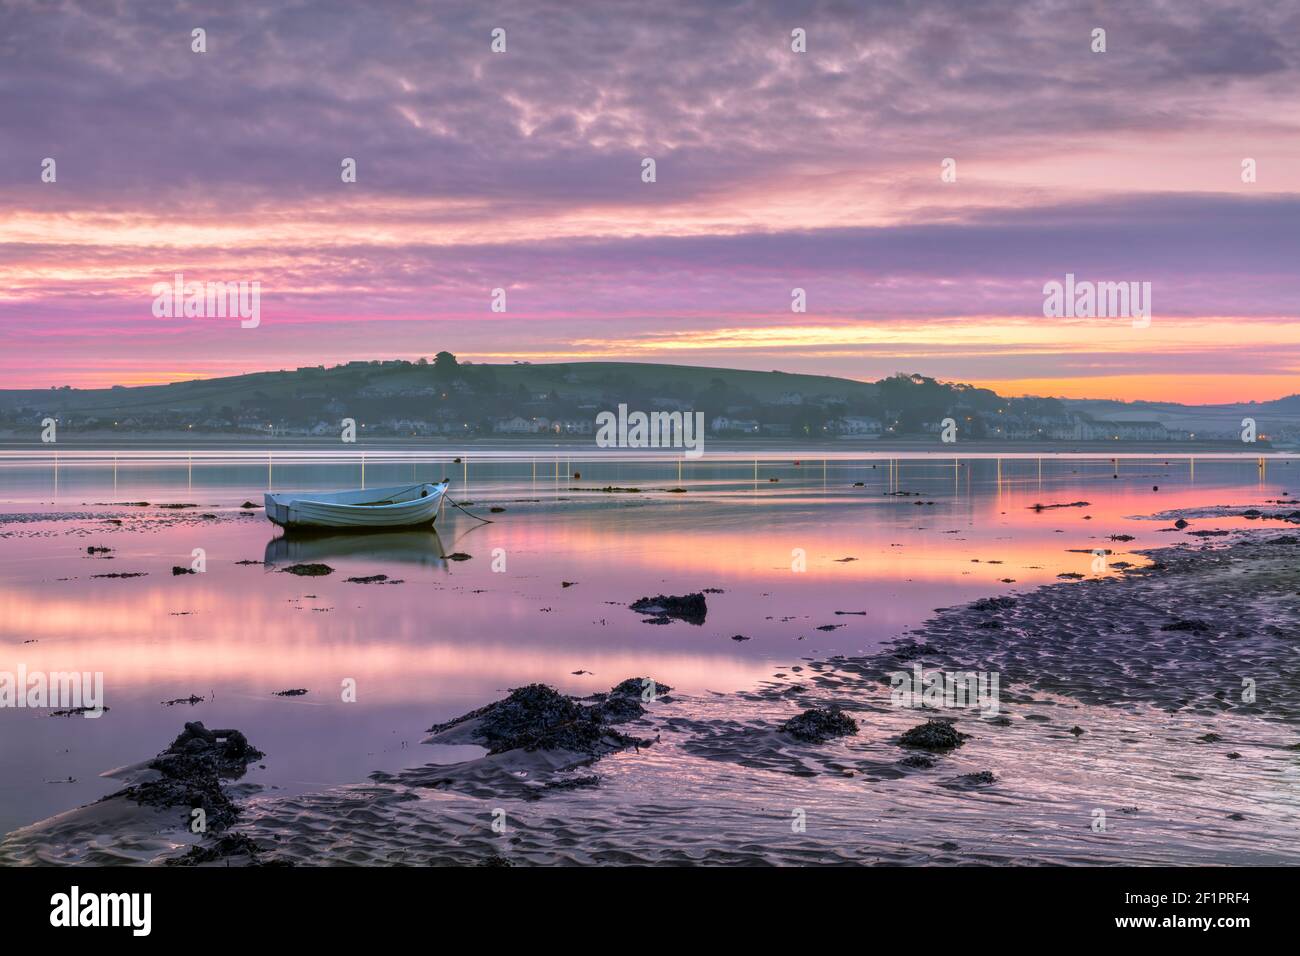 Appledore, North Devon, England. Tuesday 9th March 2021. UK Weather. After another cold night in North Devon, a beautiful sky at dawn over the River T Stock Photo